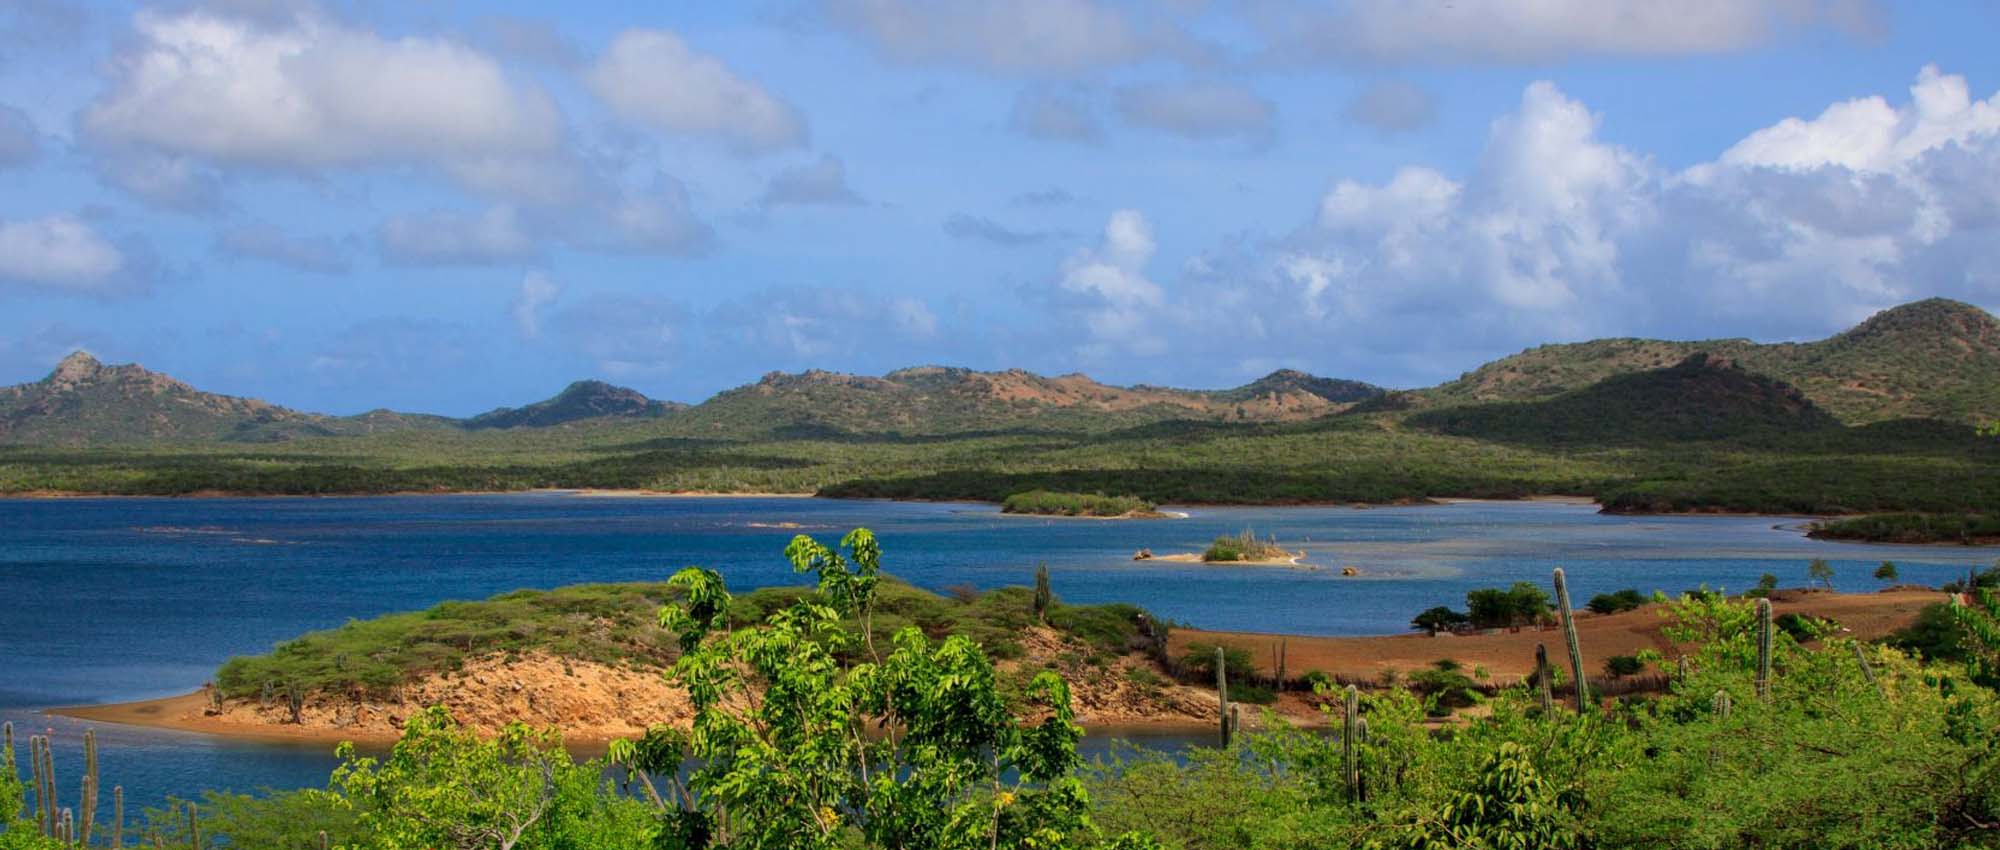 Landscape view of lagoon with hills in the background